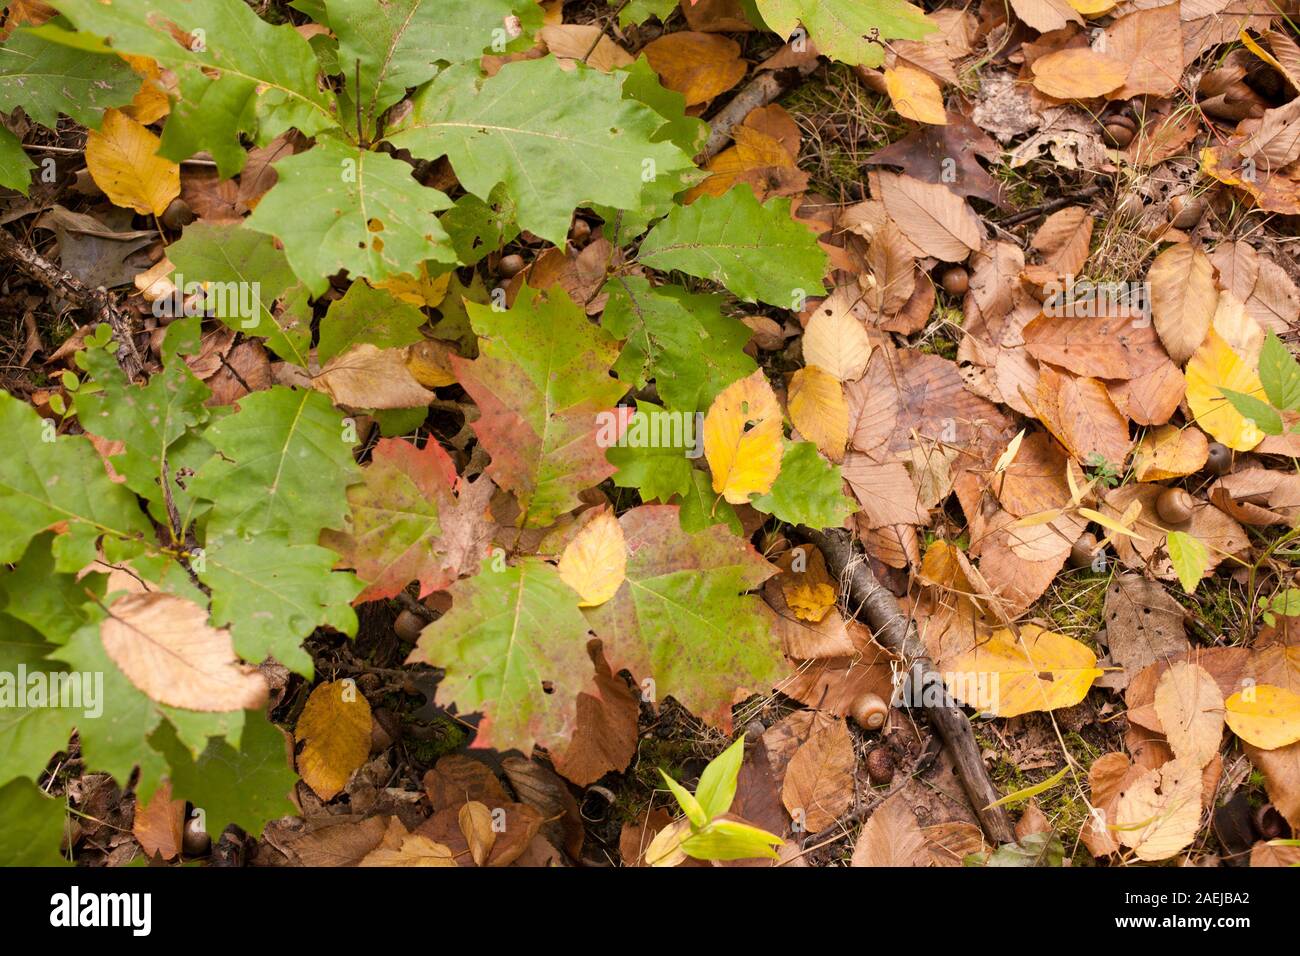 View looking down at small growing oak tree amid a scattering of fallen leaves. Stock Photo